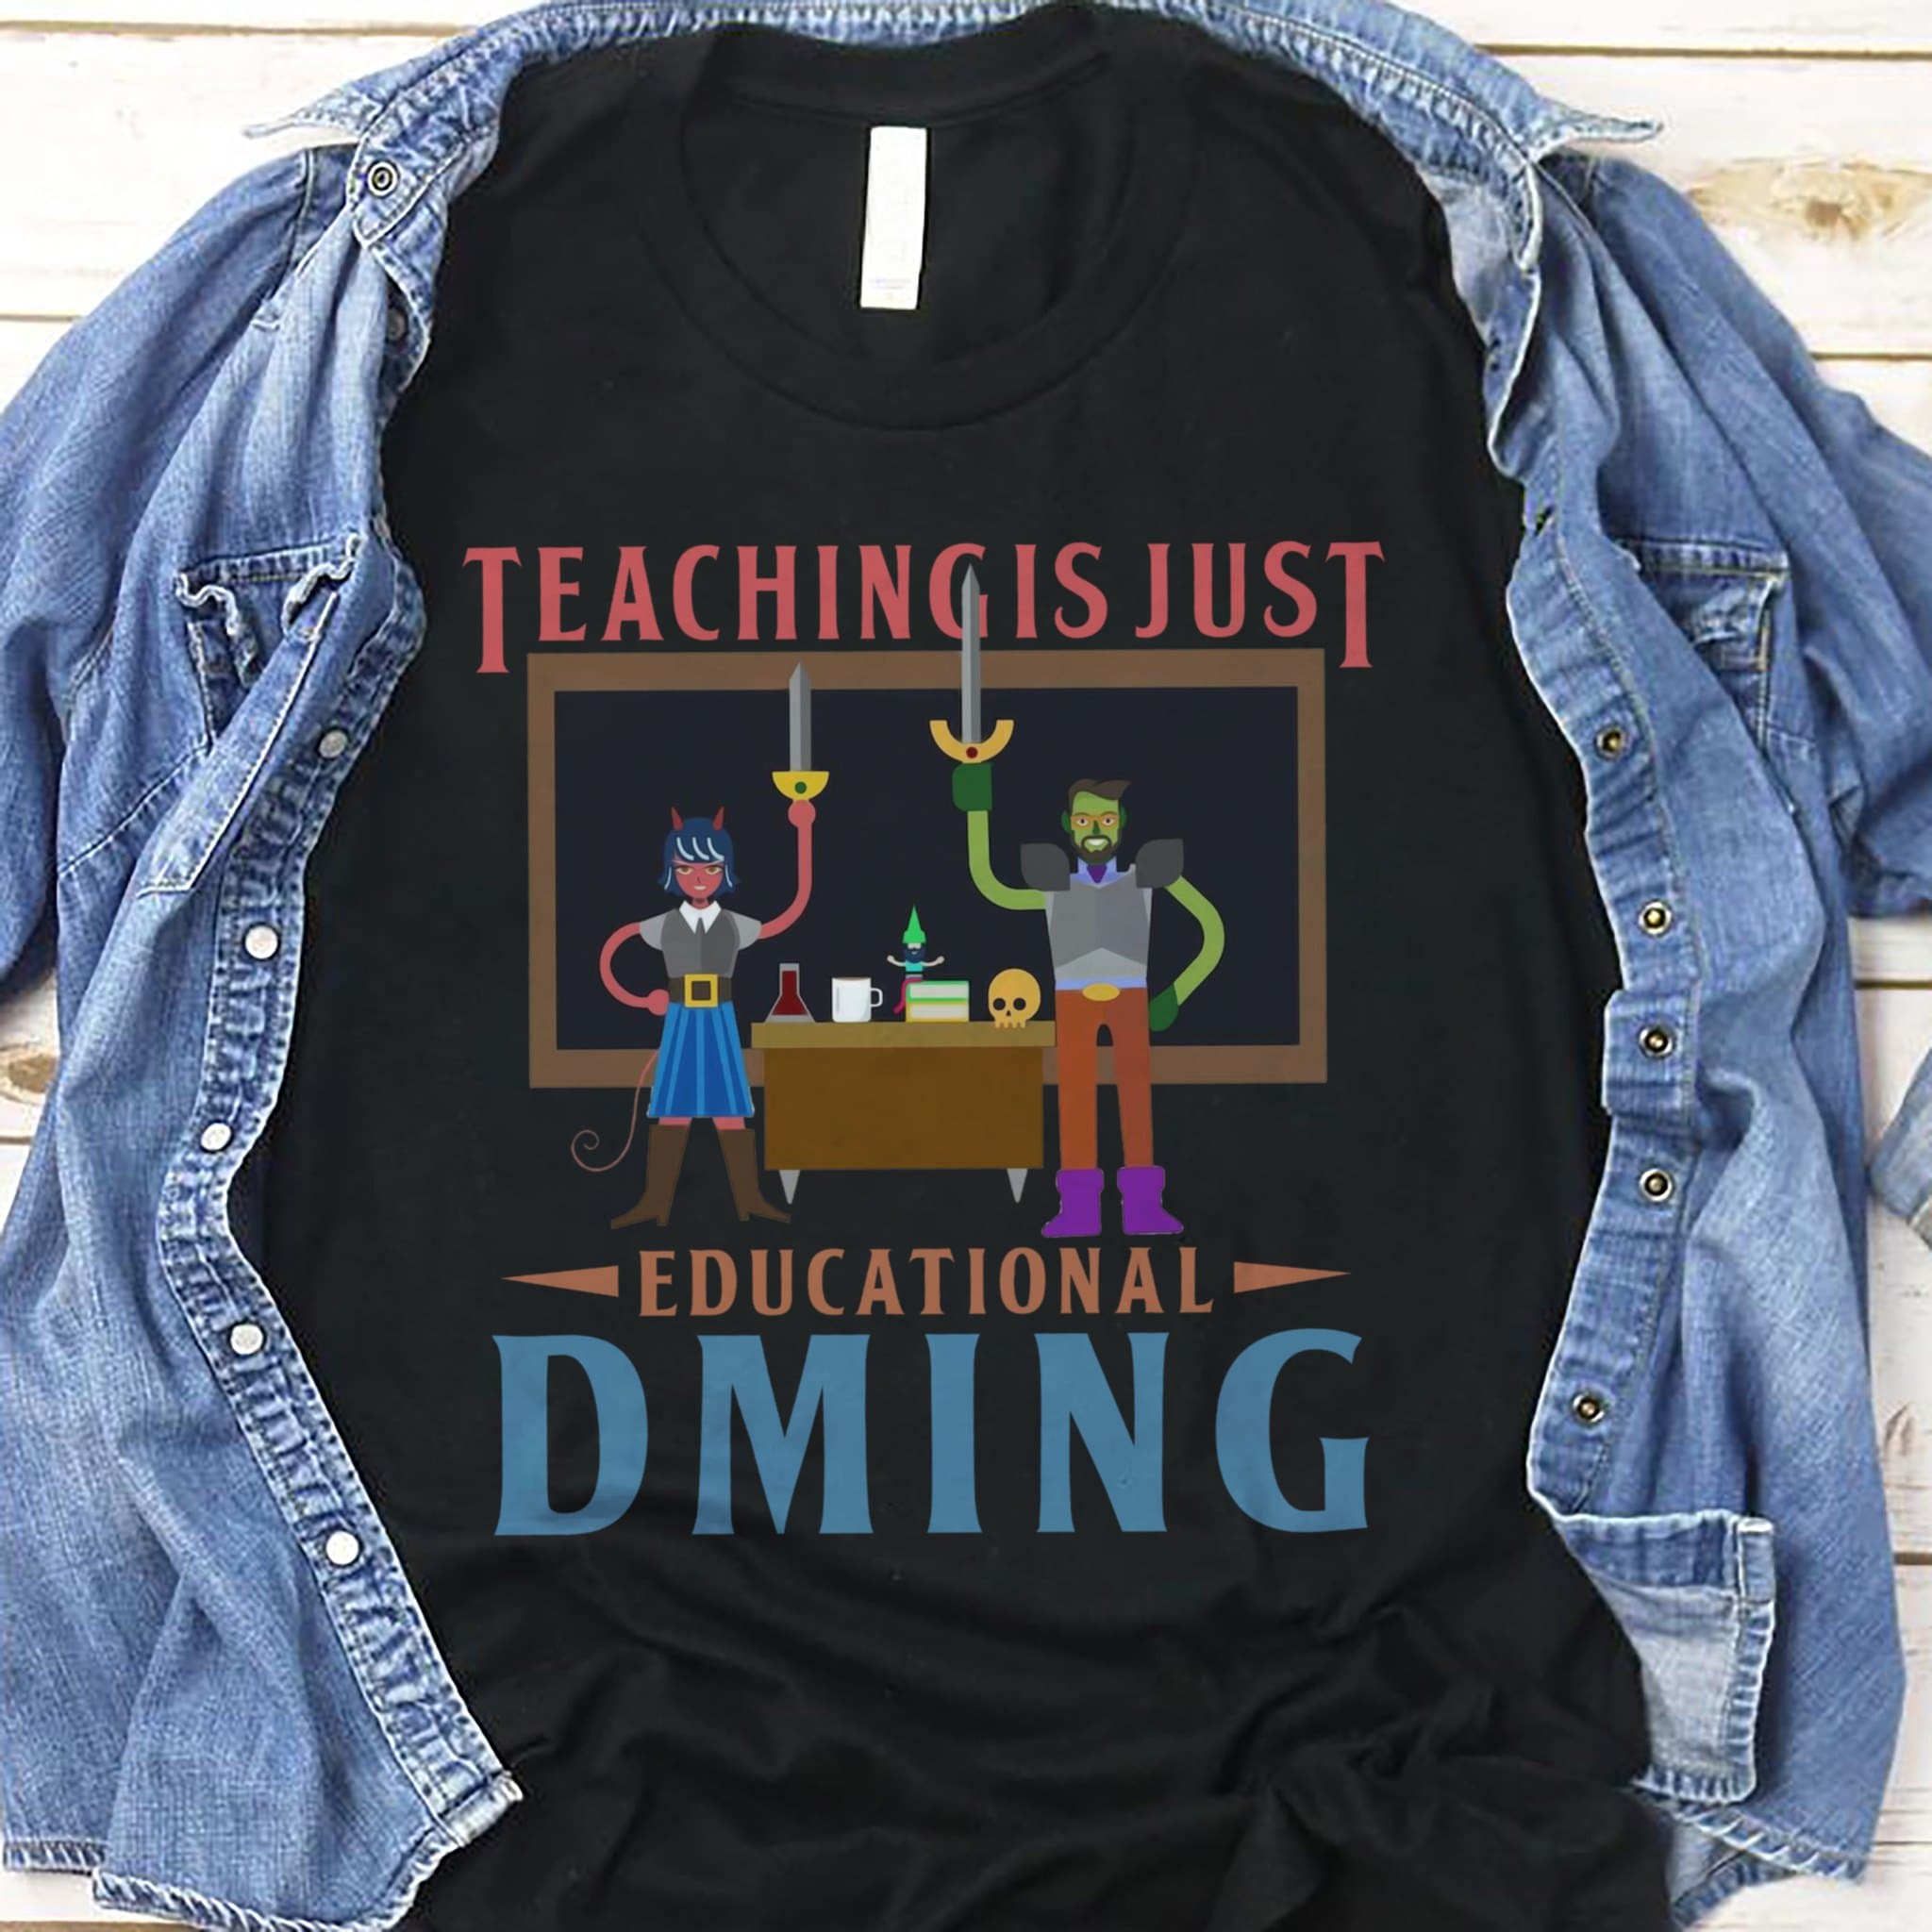 Teaching is just educational Dming - Dungeons and Dragons, Funny gift for teacher